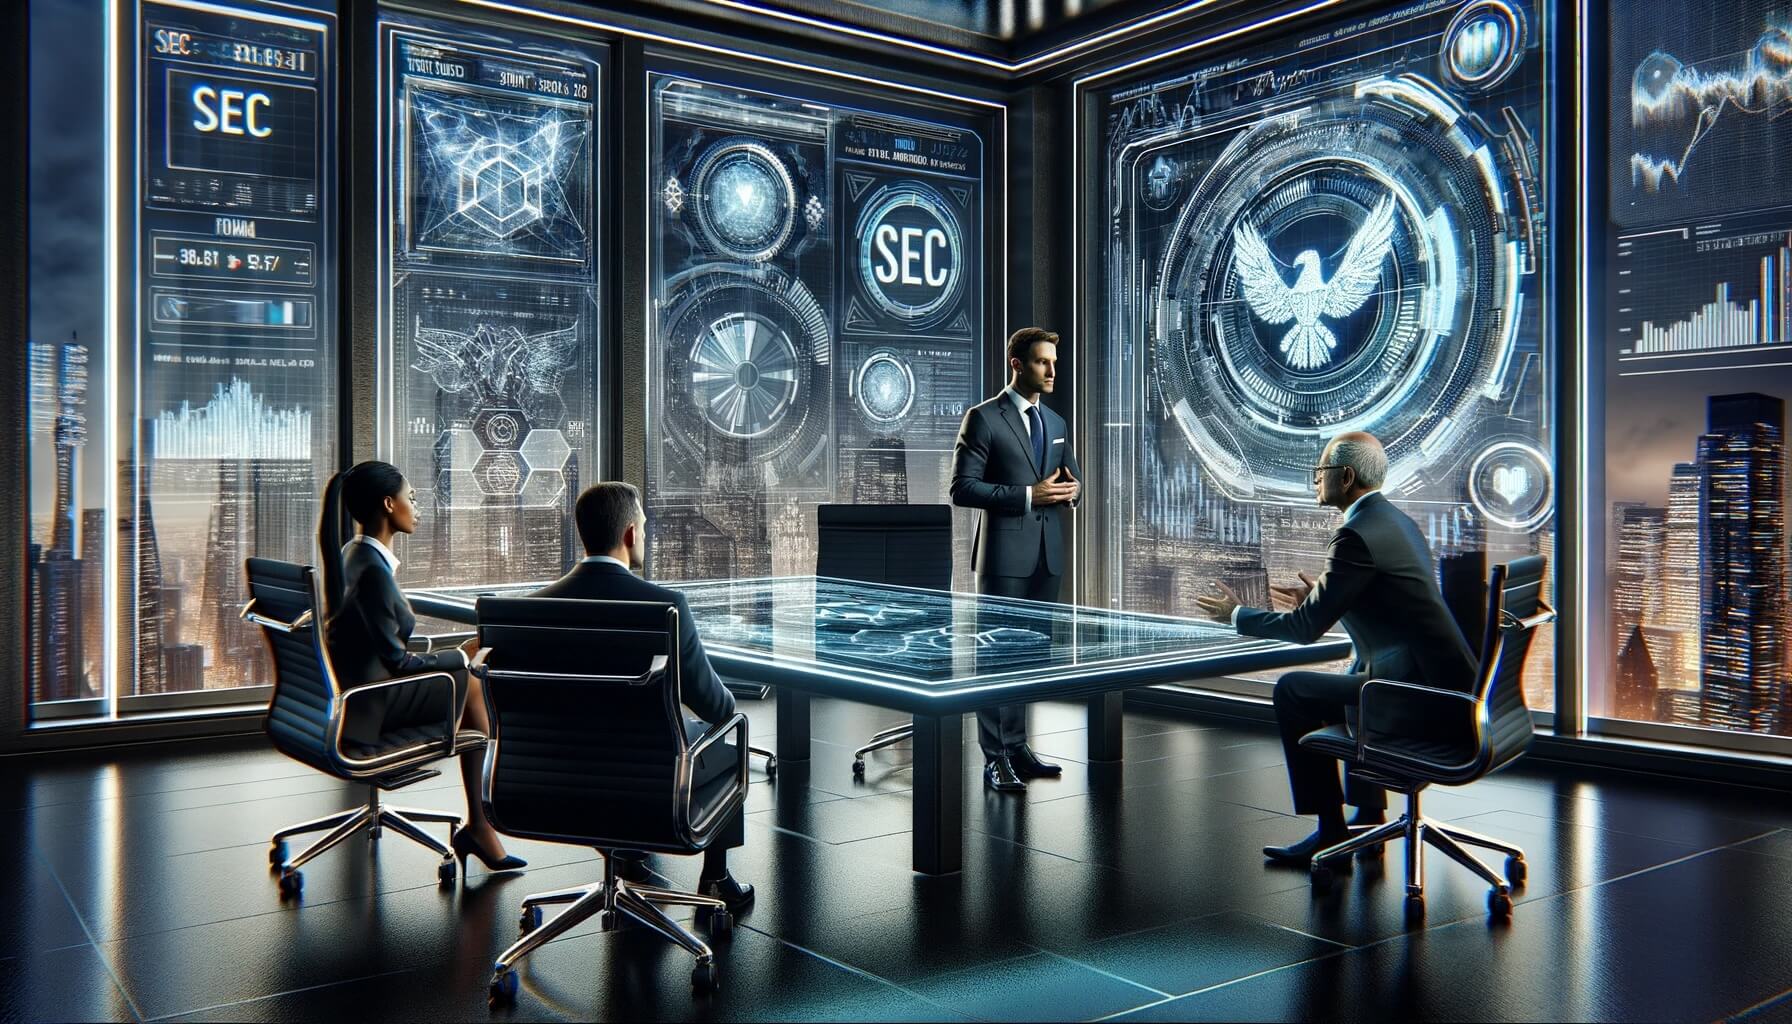 DALL%C2%B7E 2023 11 29 14.35.53 A futuristic meeting room with advanced technology depicting a major asset manager in discussion with SEC representatives. The room is sleek and mode